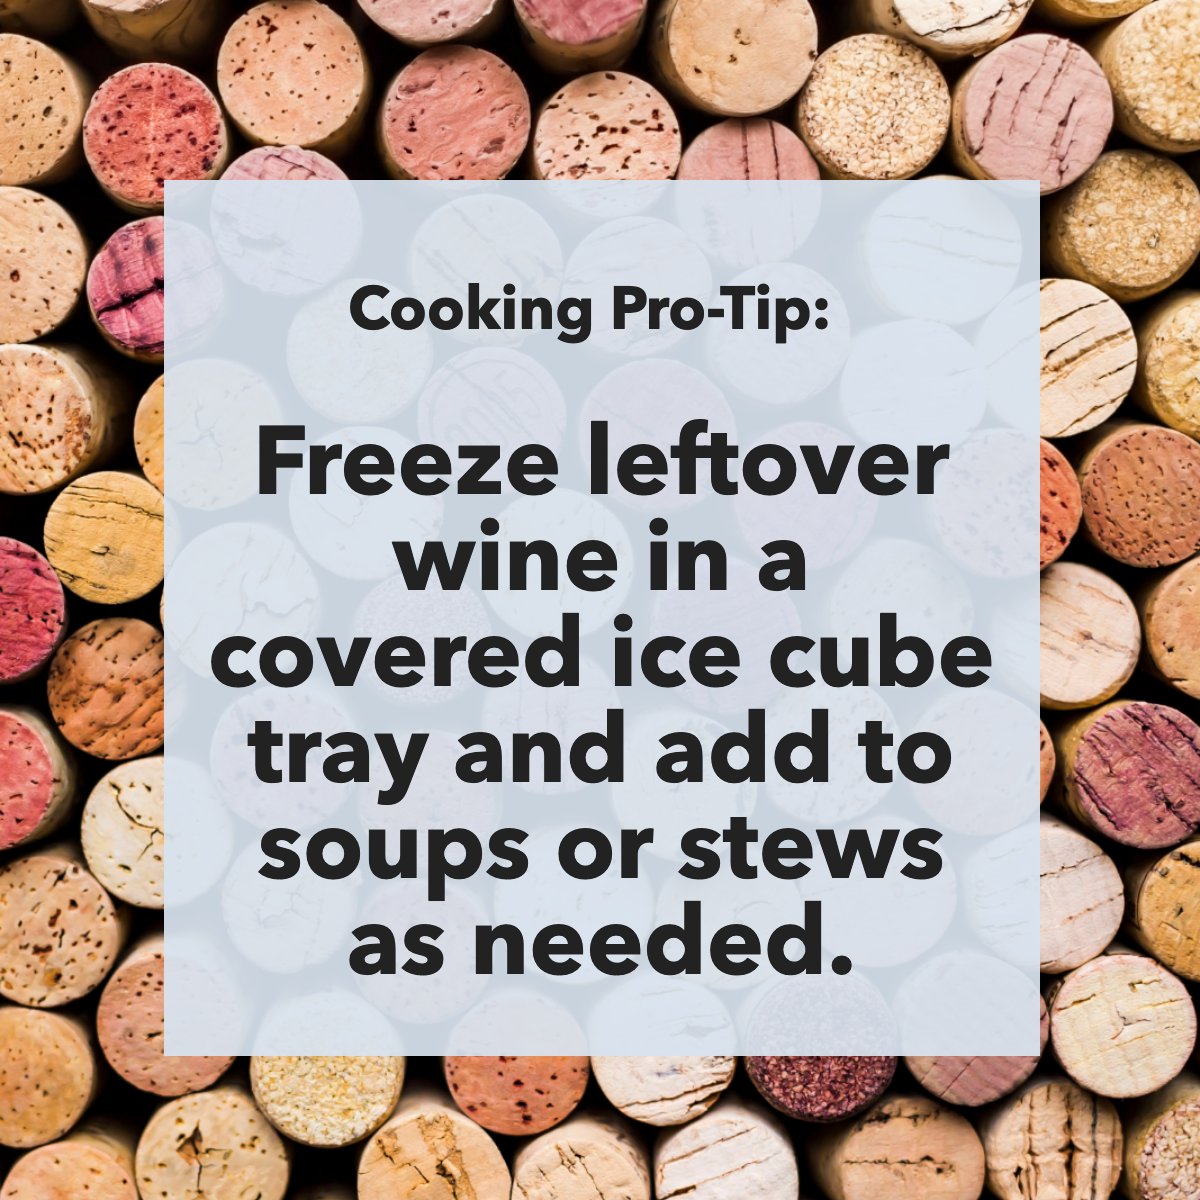 Leftover wine 🍷? Don't pour it down the drain. ❄️ Freeze it in a covered ice cube tray instead. That way, you can use it in soups or stews as needed. Do you have a favorite cooking hack? Share it below. #wine #winecorks #cooking #cookingtip #kitchenhack